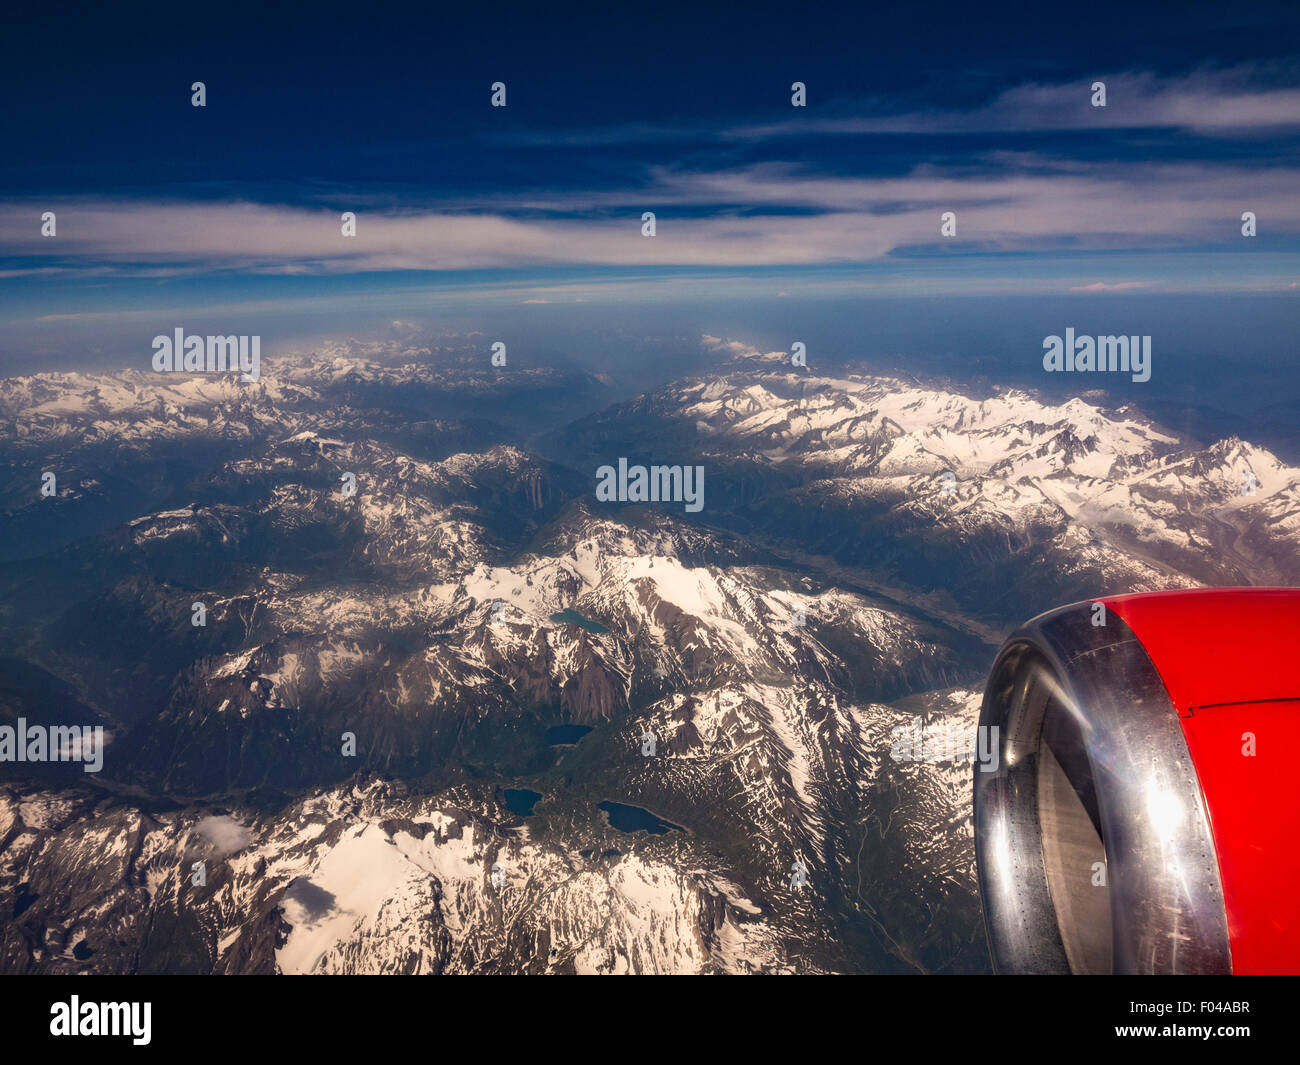 The snow covered Alps mountain range shot from an aeroplane window. Stock Photo